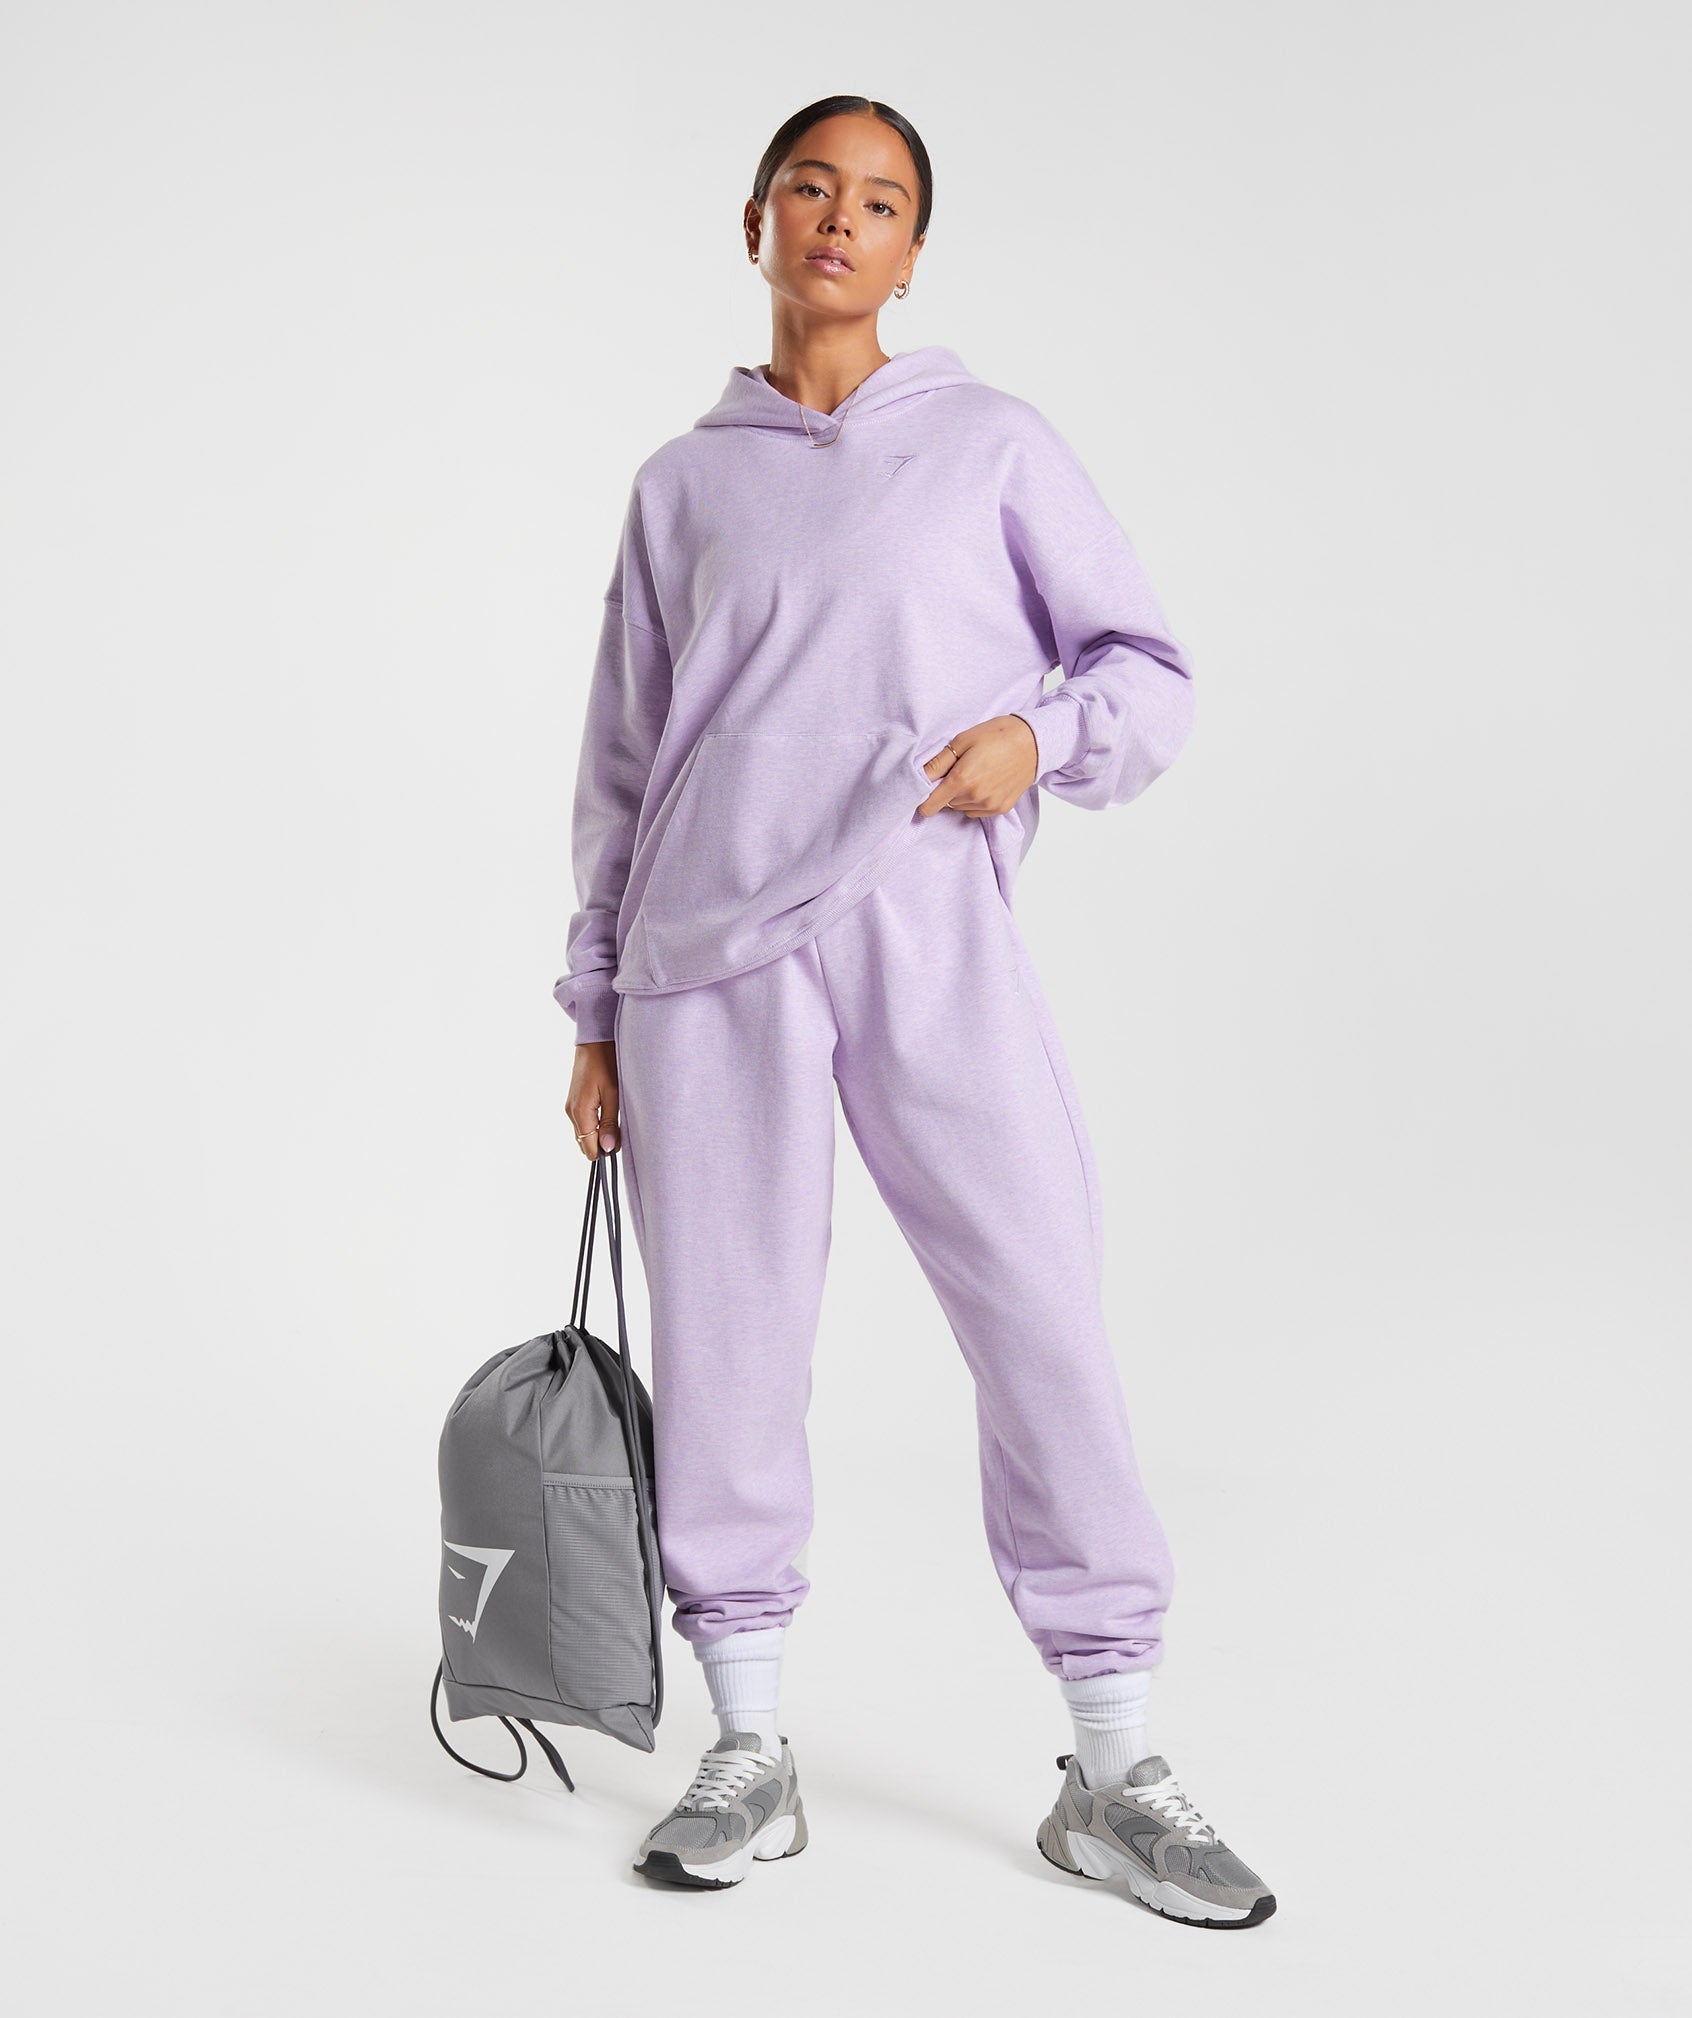 Rest Day Sweats Hoodie in Aura Lilac Marl - view 5